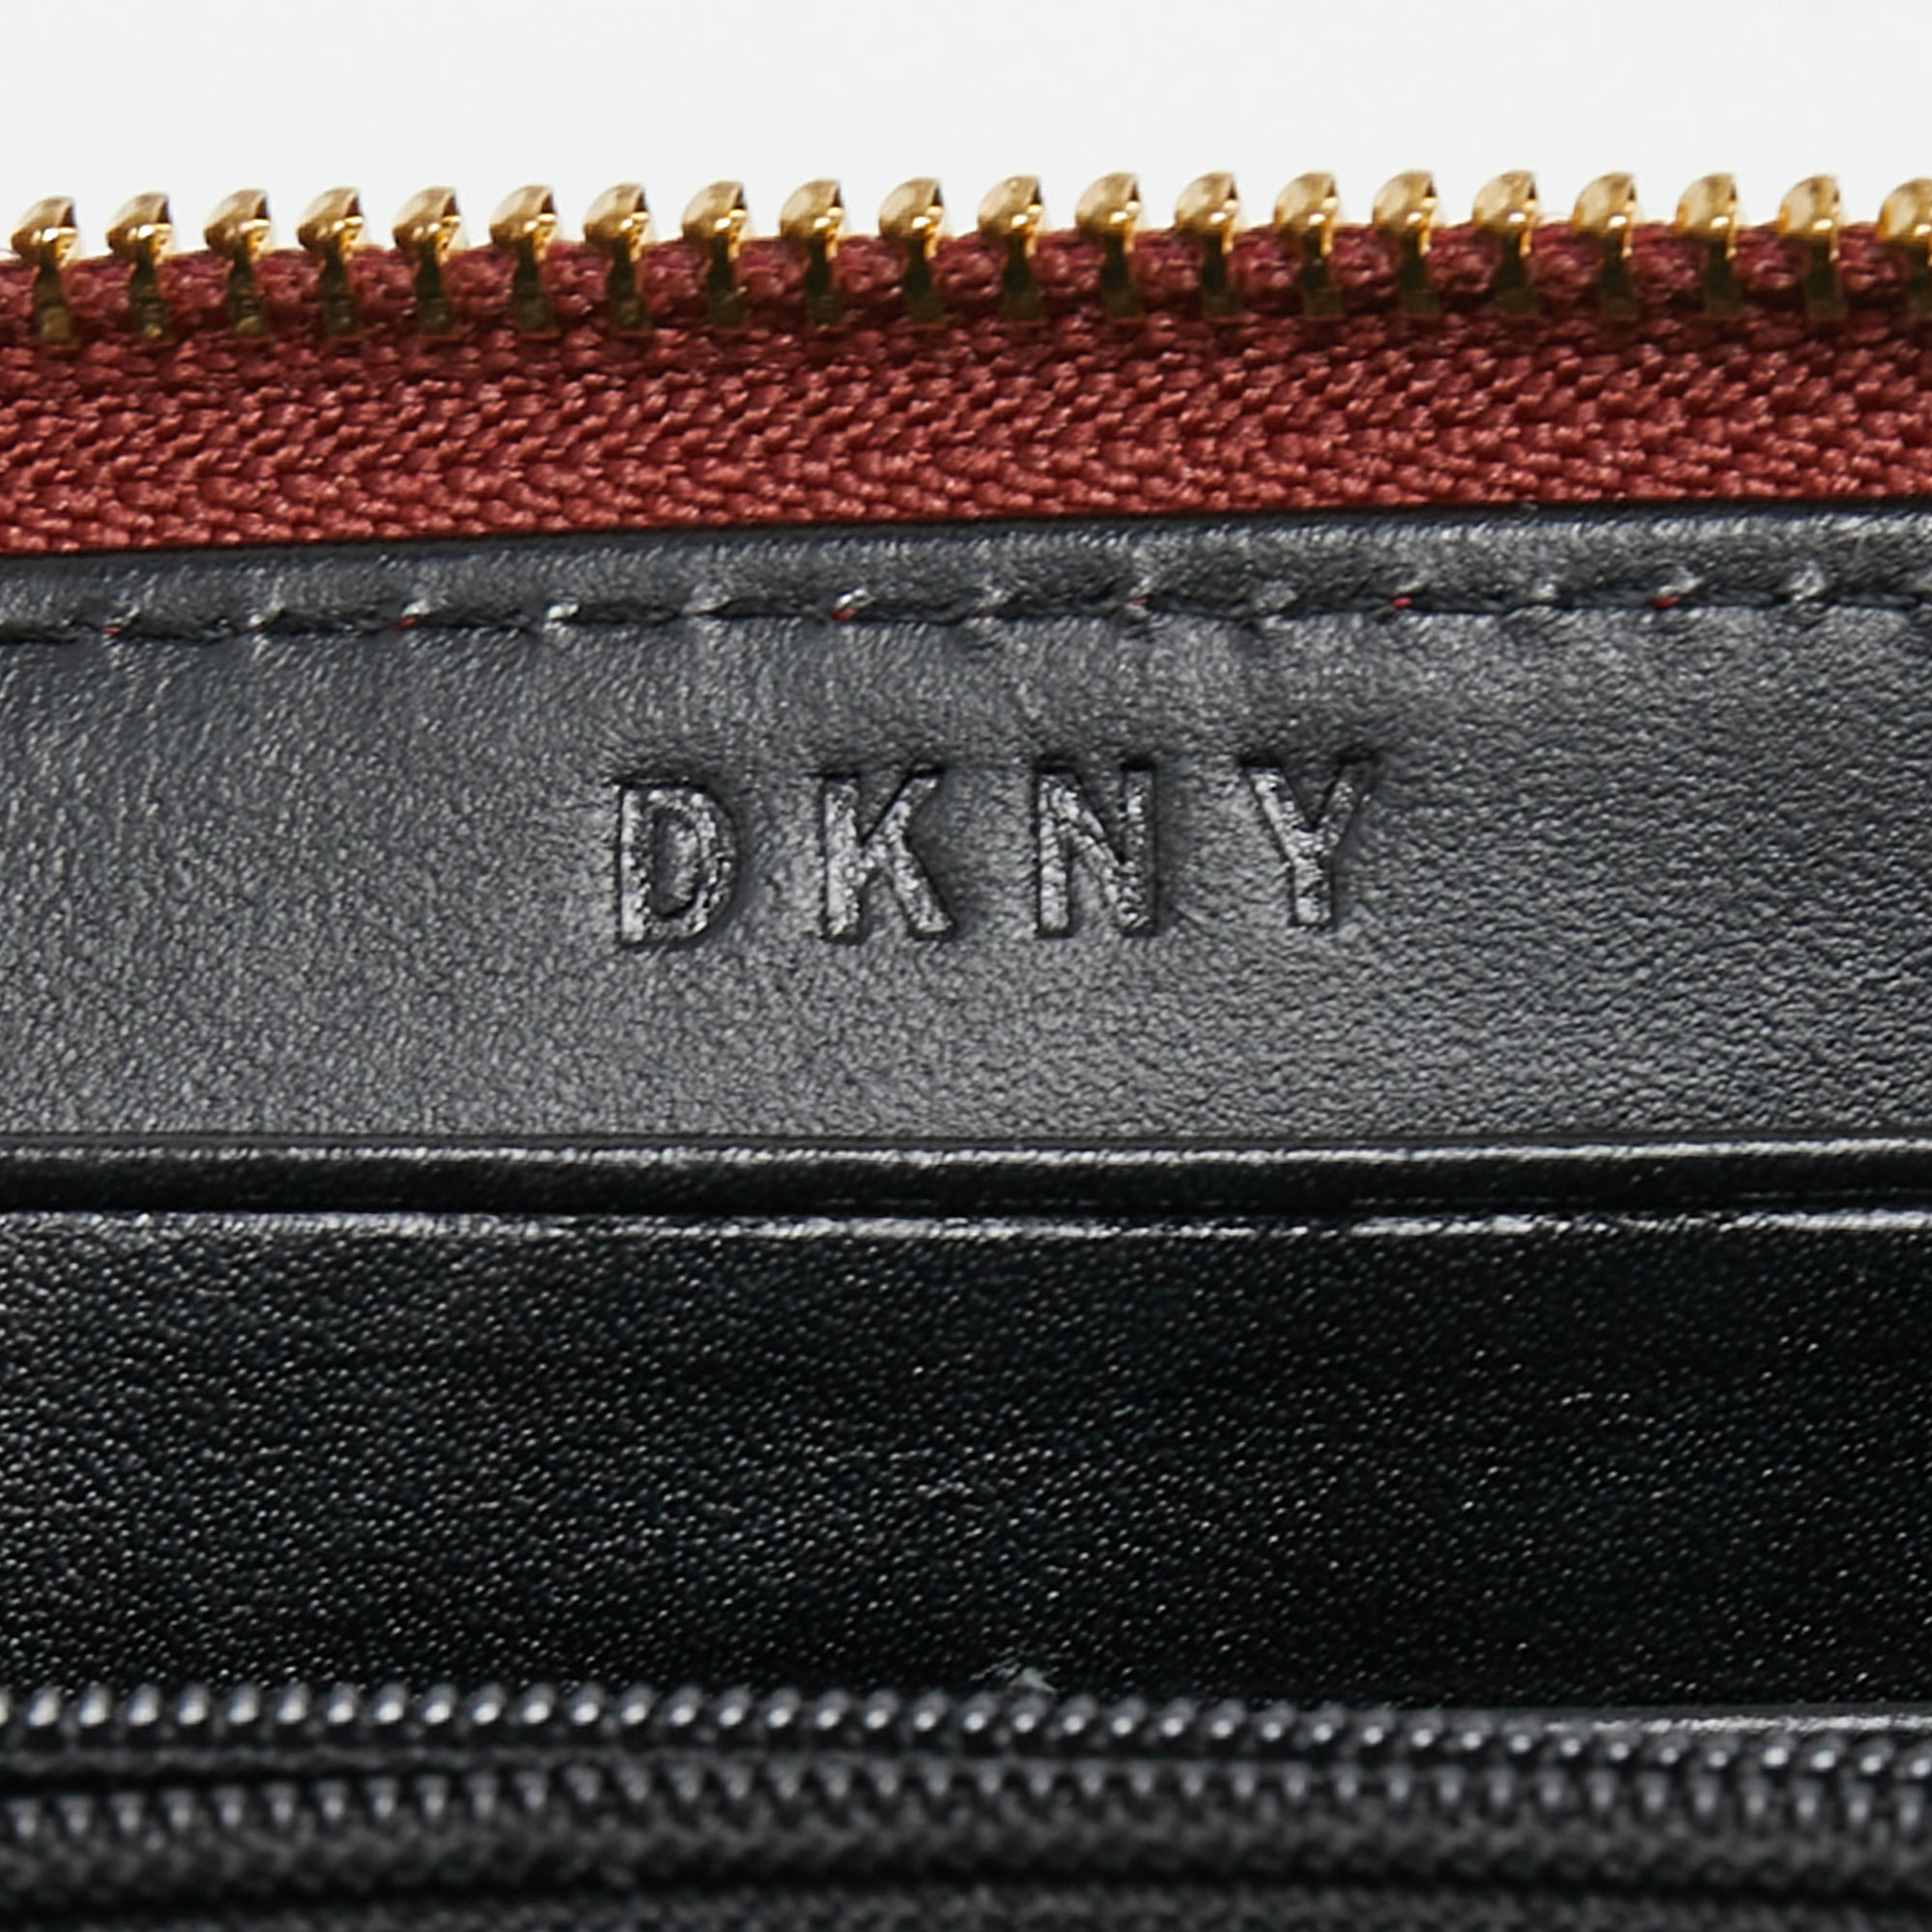 DKNY Red Quilted Leather Zip Around Compact Wallet